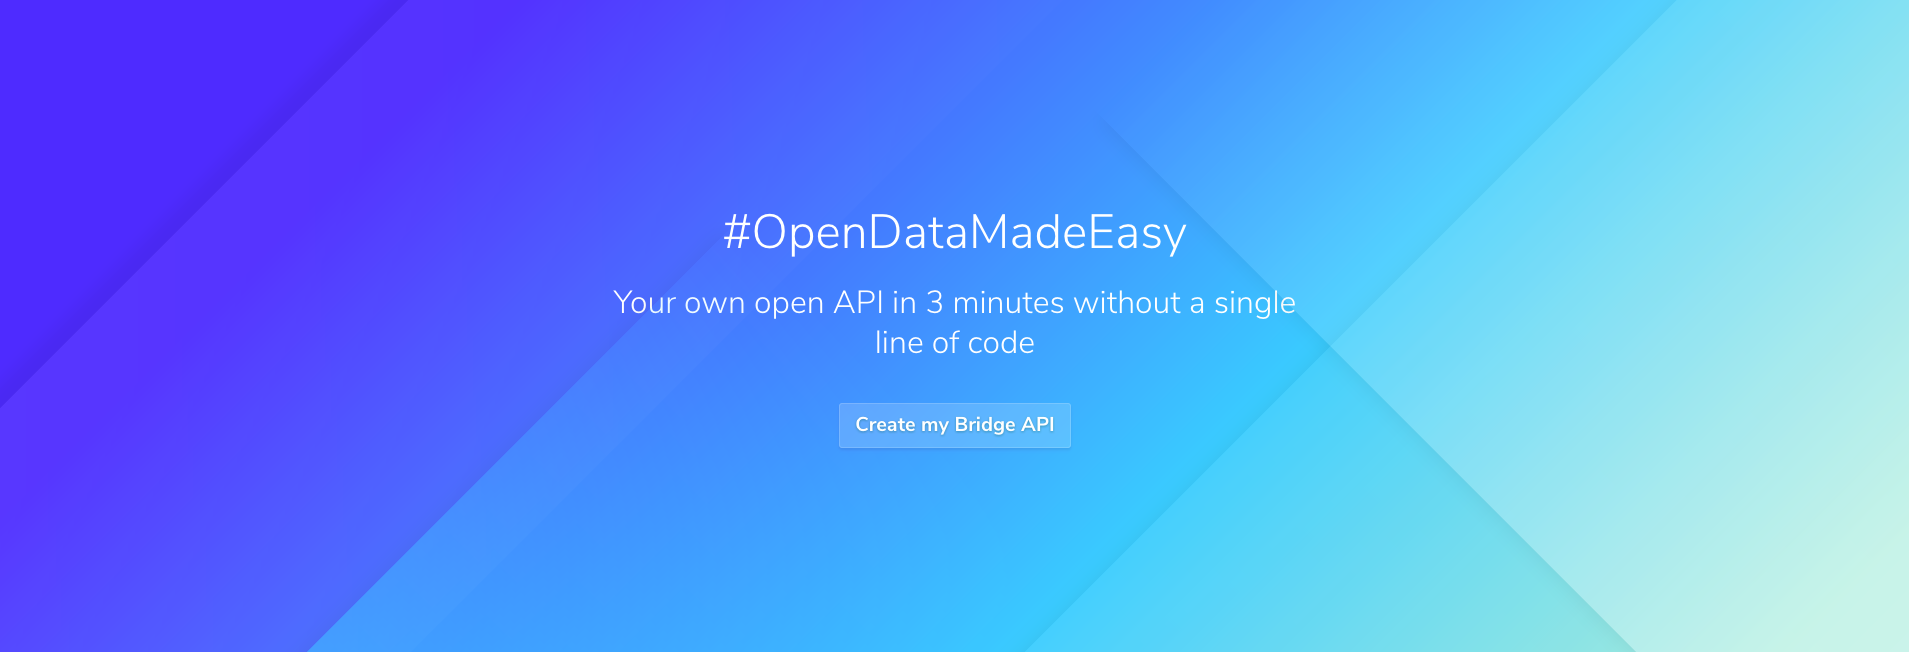 Create an open REST API in 2 minutes with Bridge [no code]